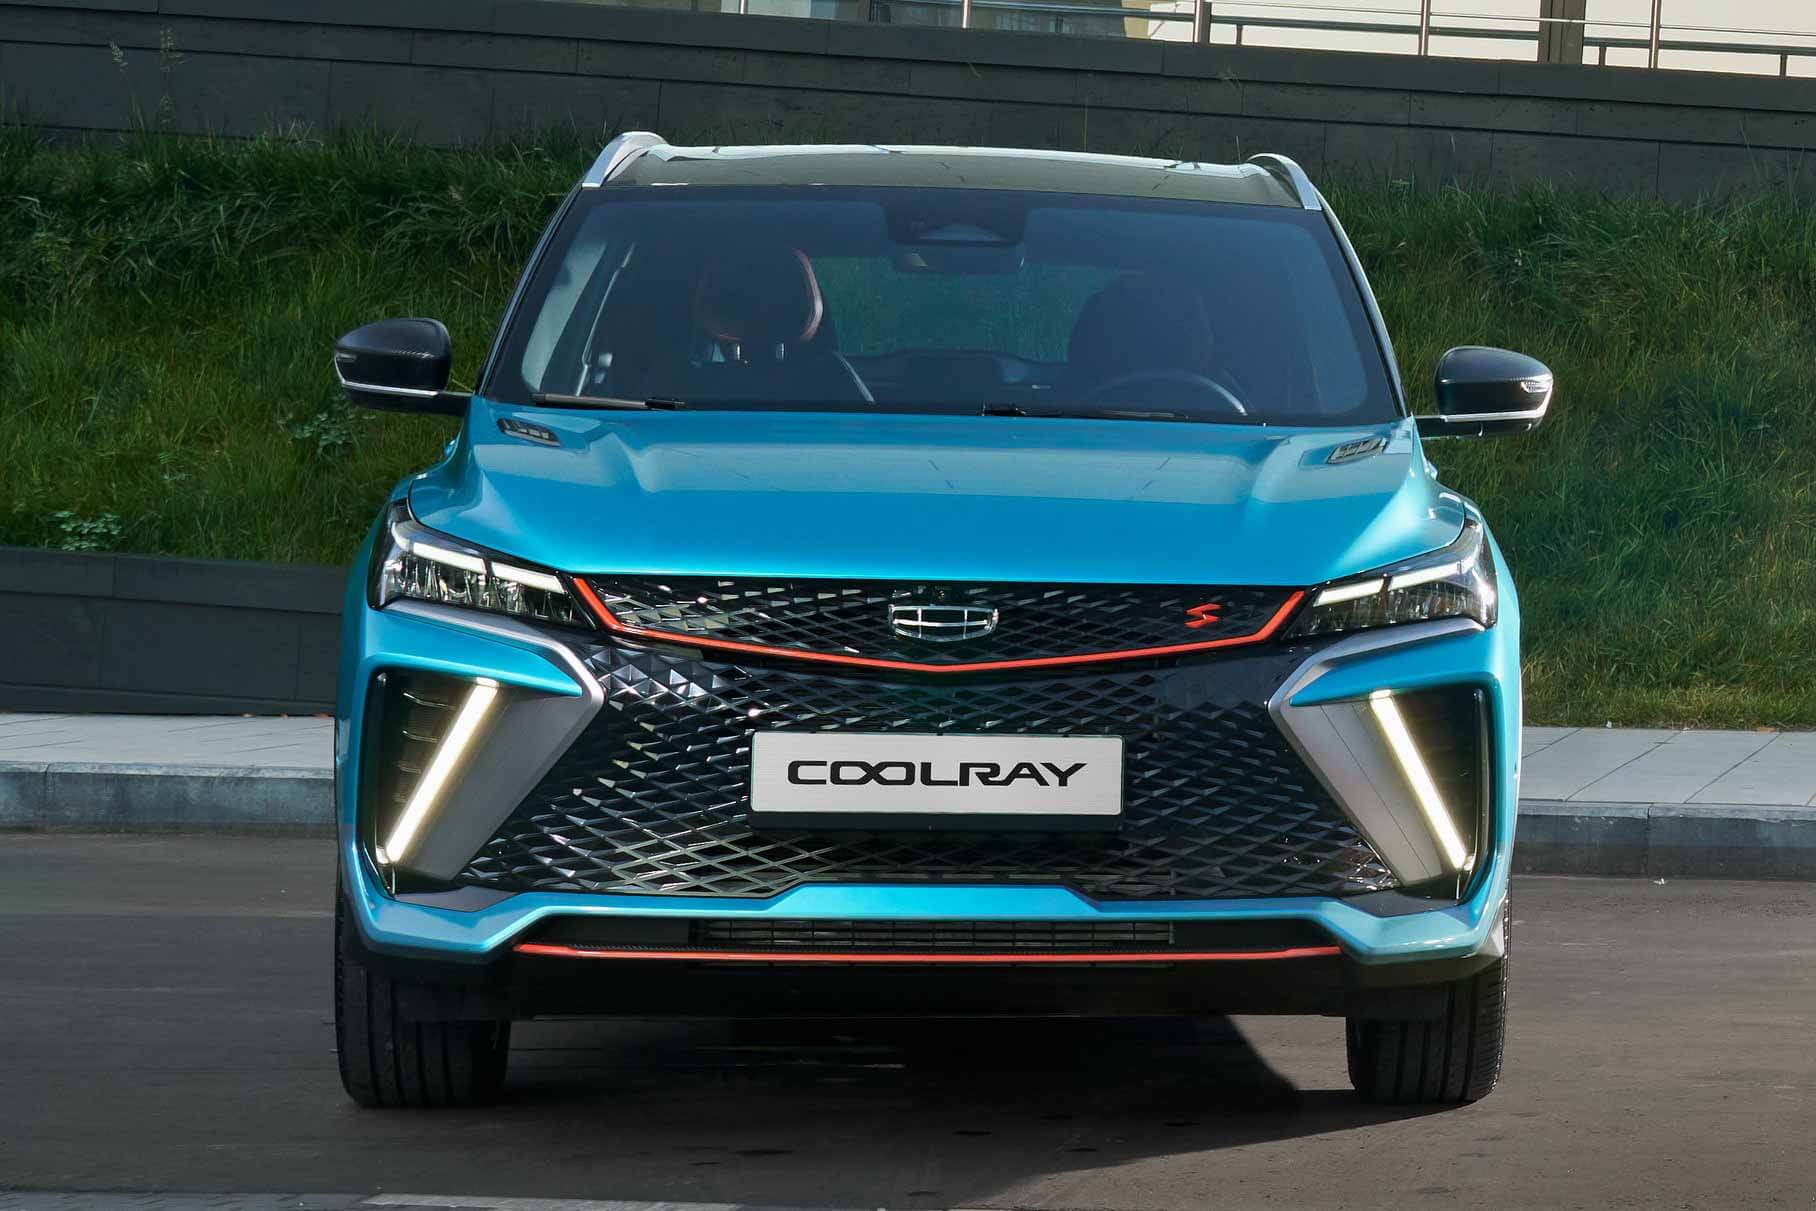 Geely will modify Coolray, Monjaro and Tugella to please the Russians